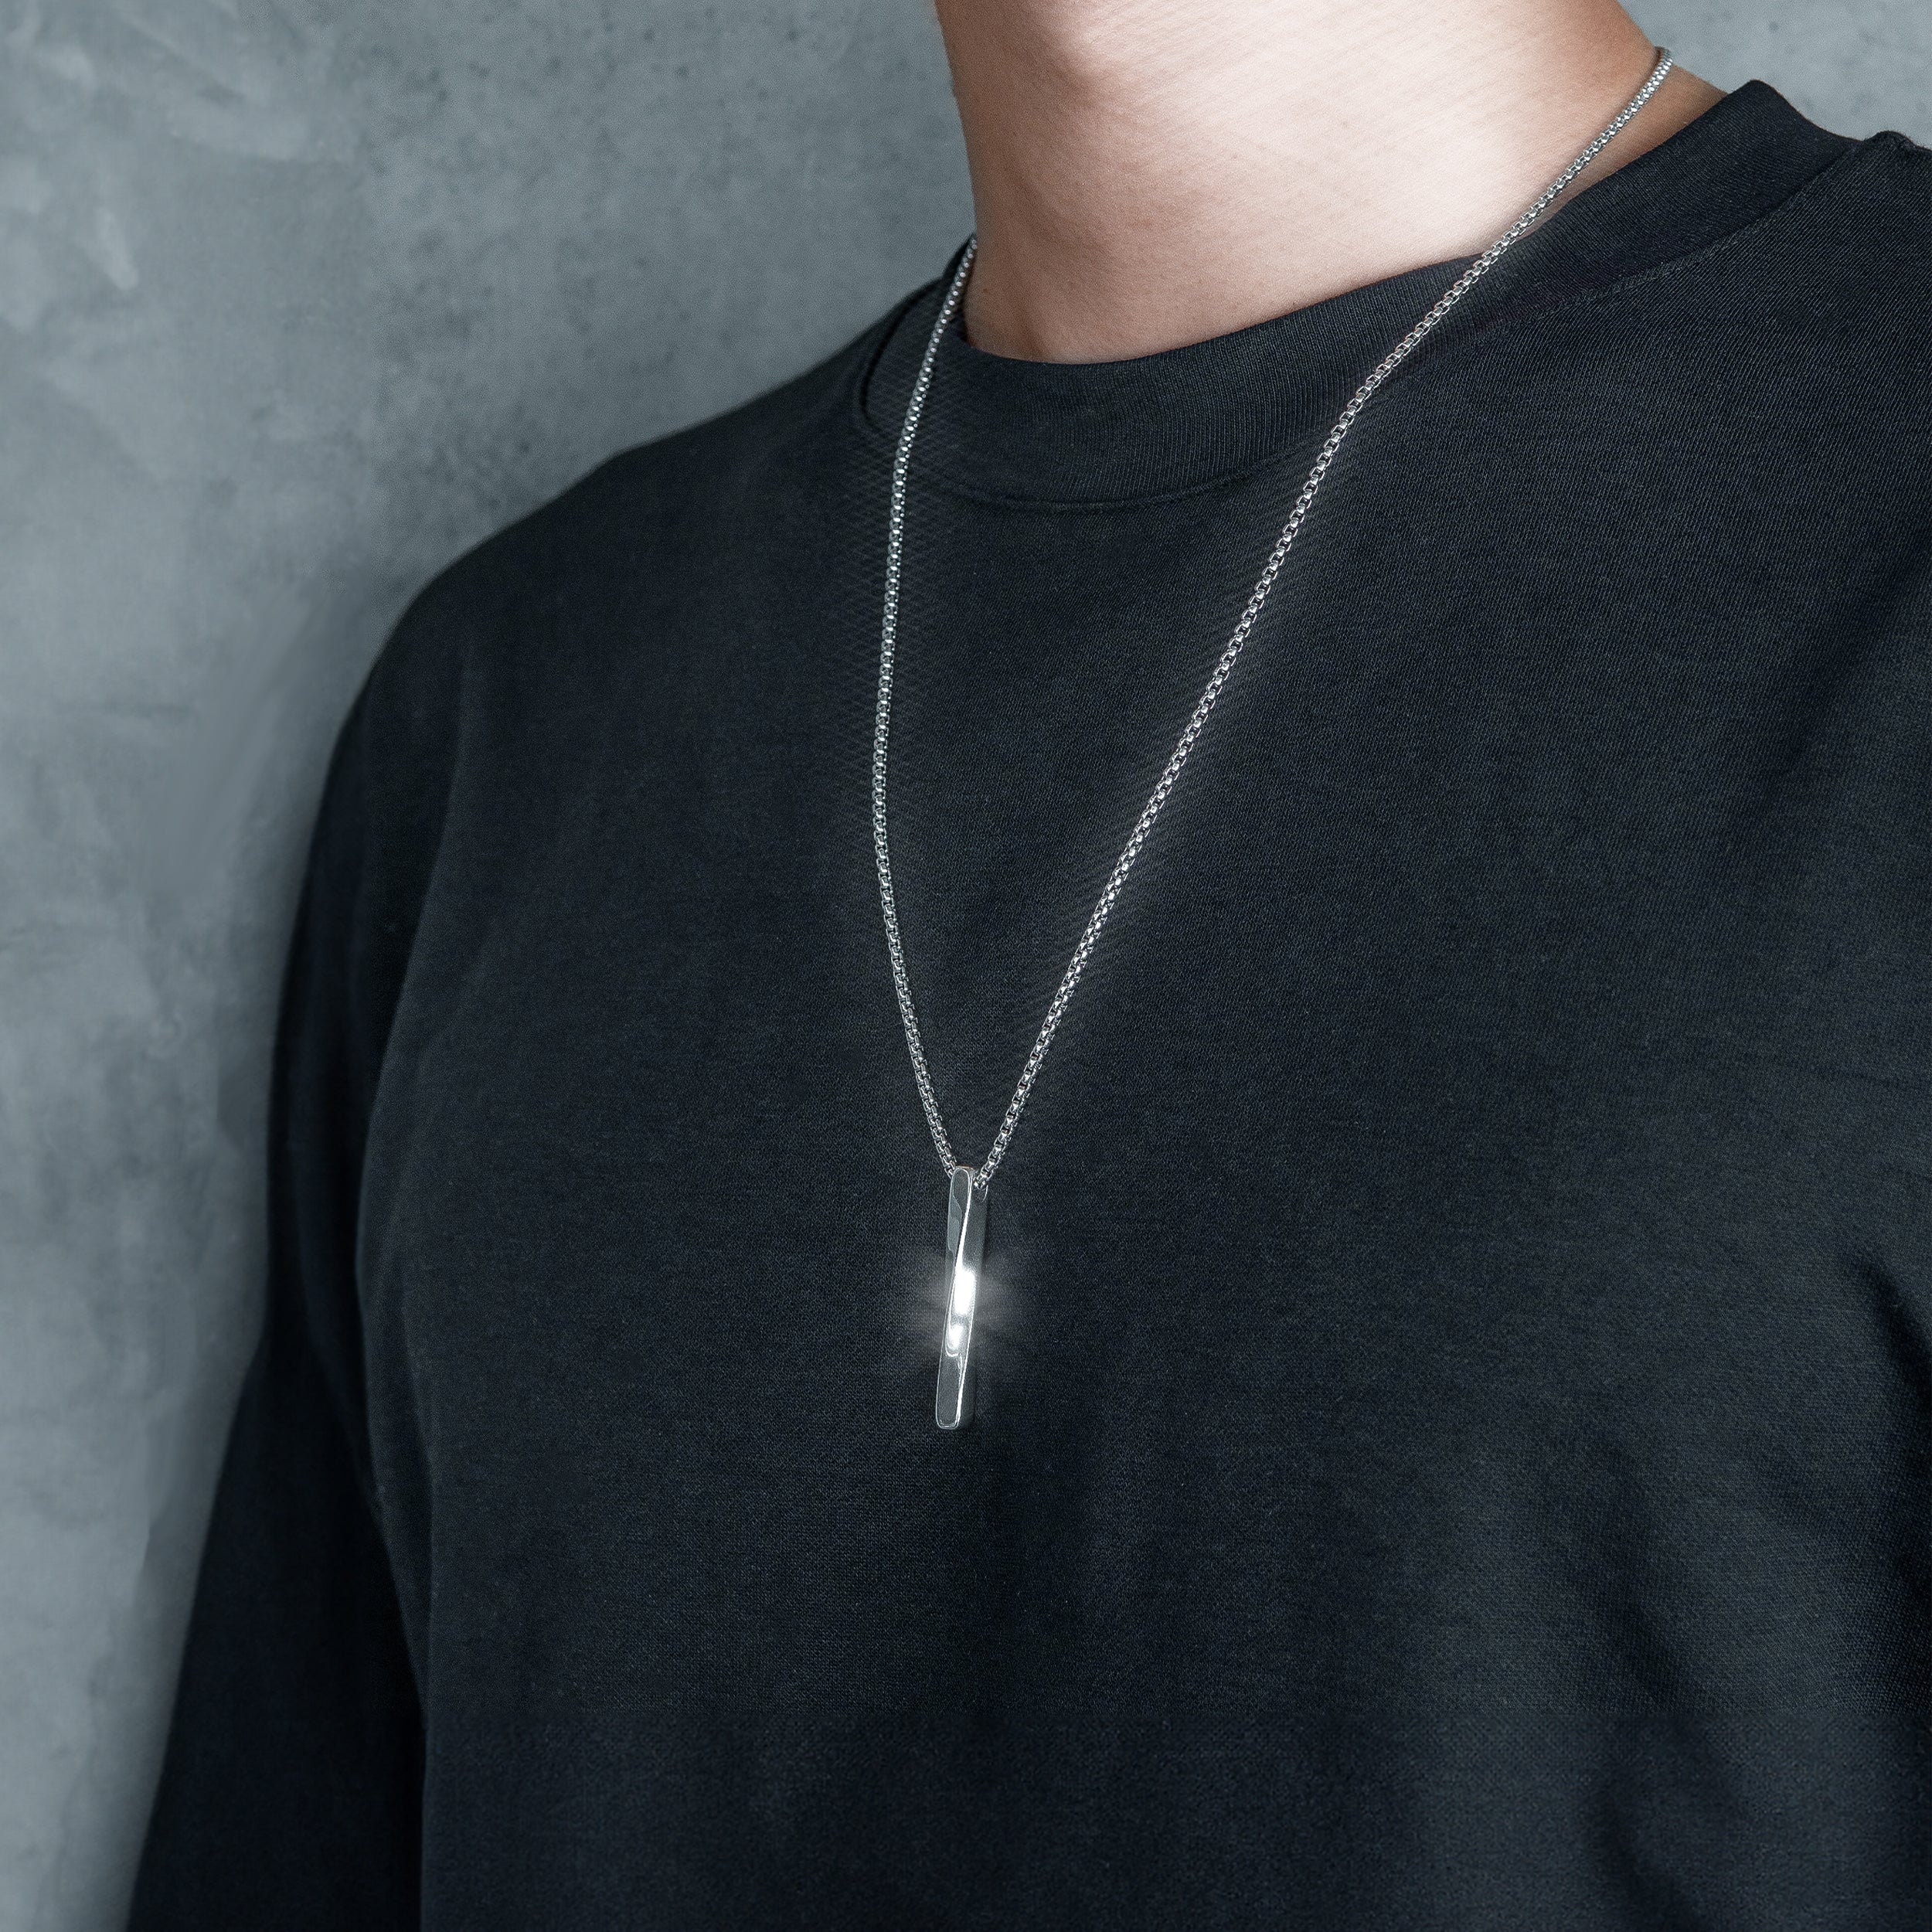 Get your owens Pendant necklace for free